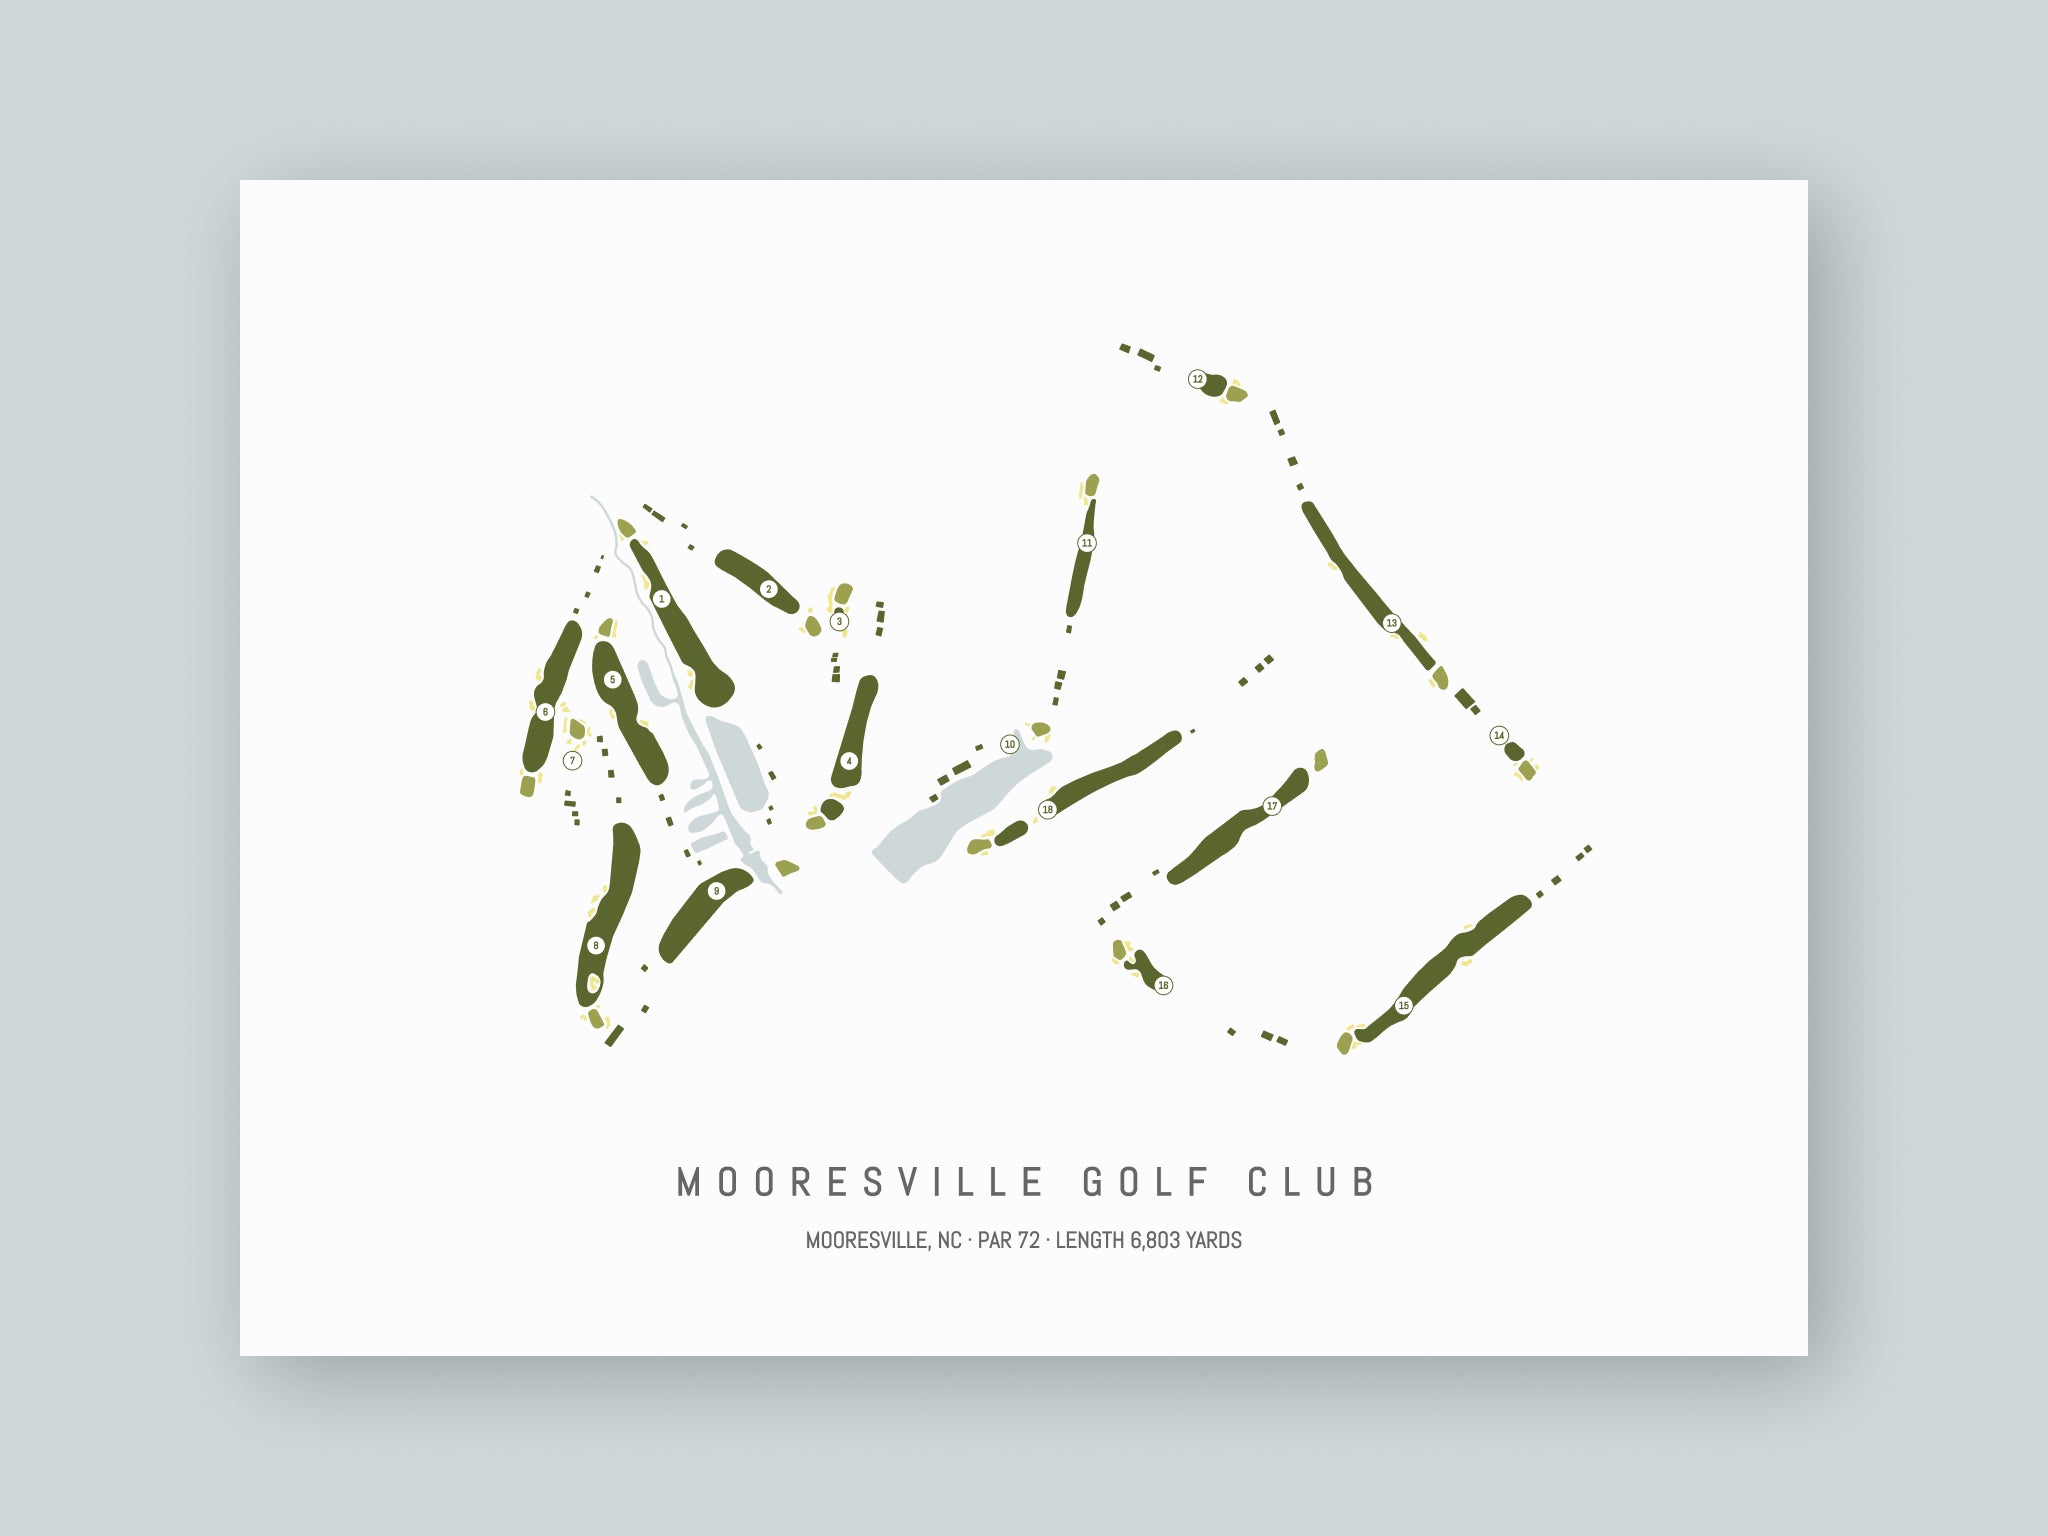 Mooresville-Golf-Club-NC--Unframed-24x18-With-Hole-Numbers